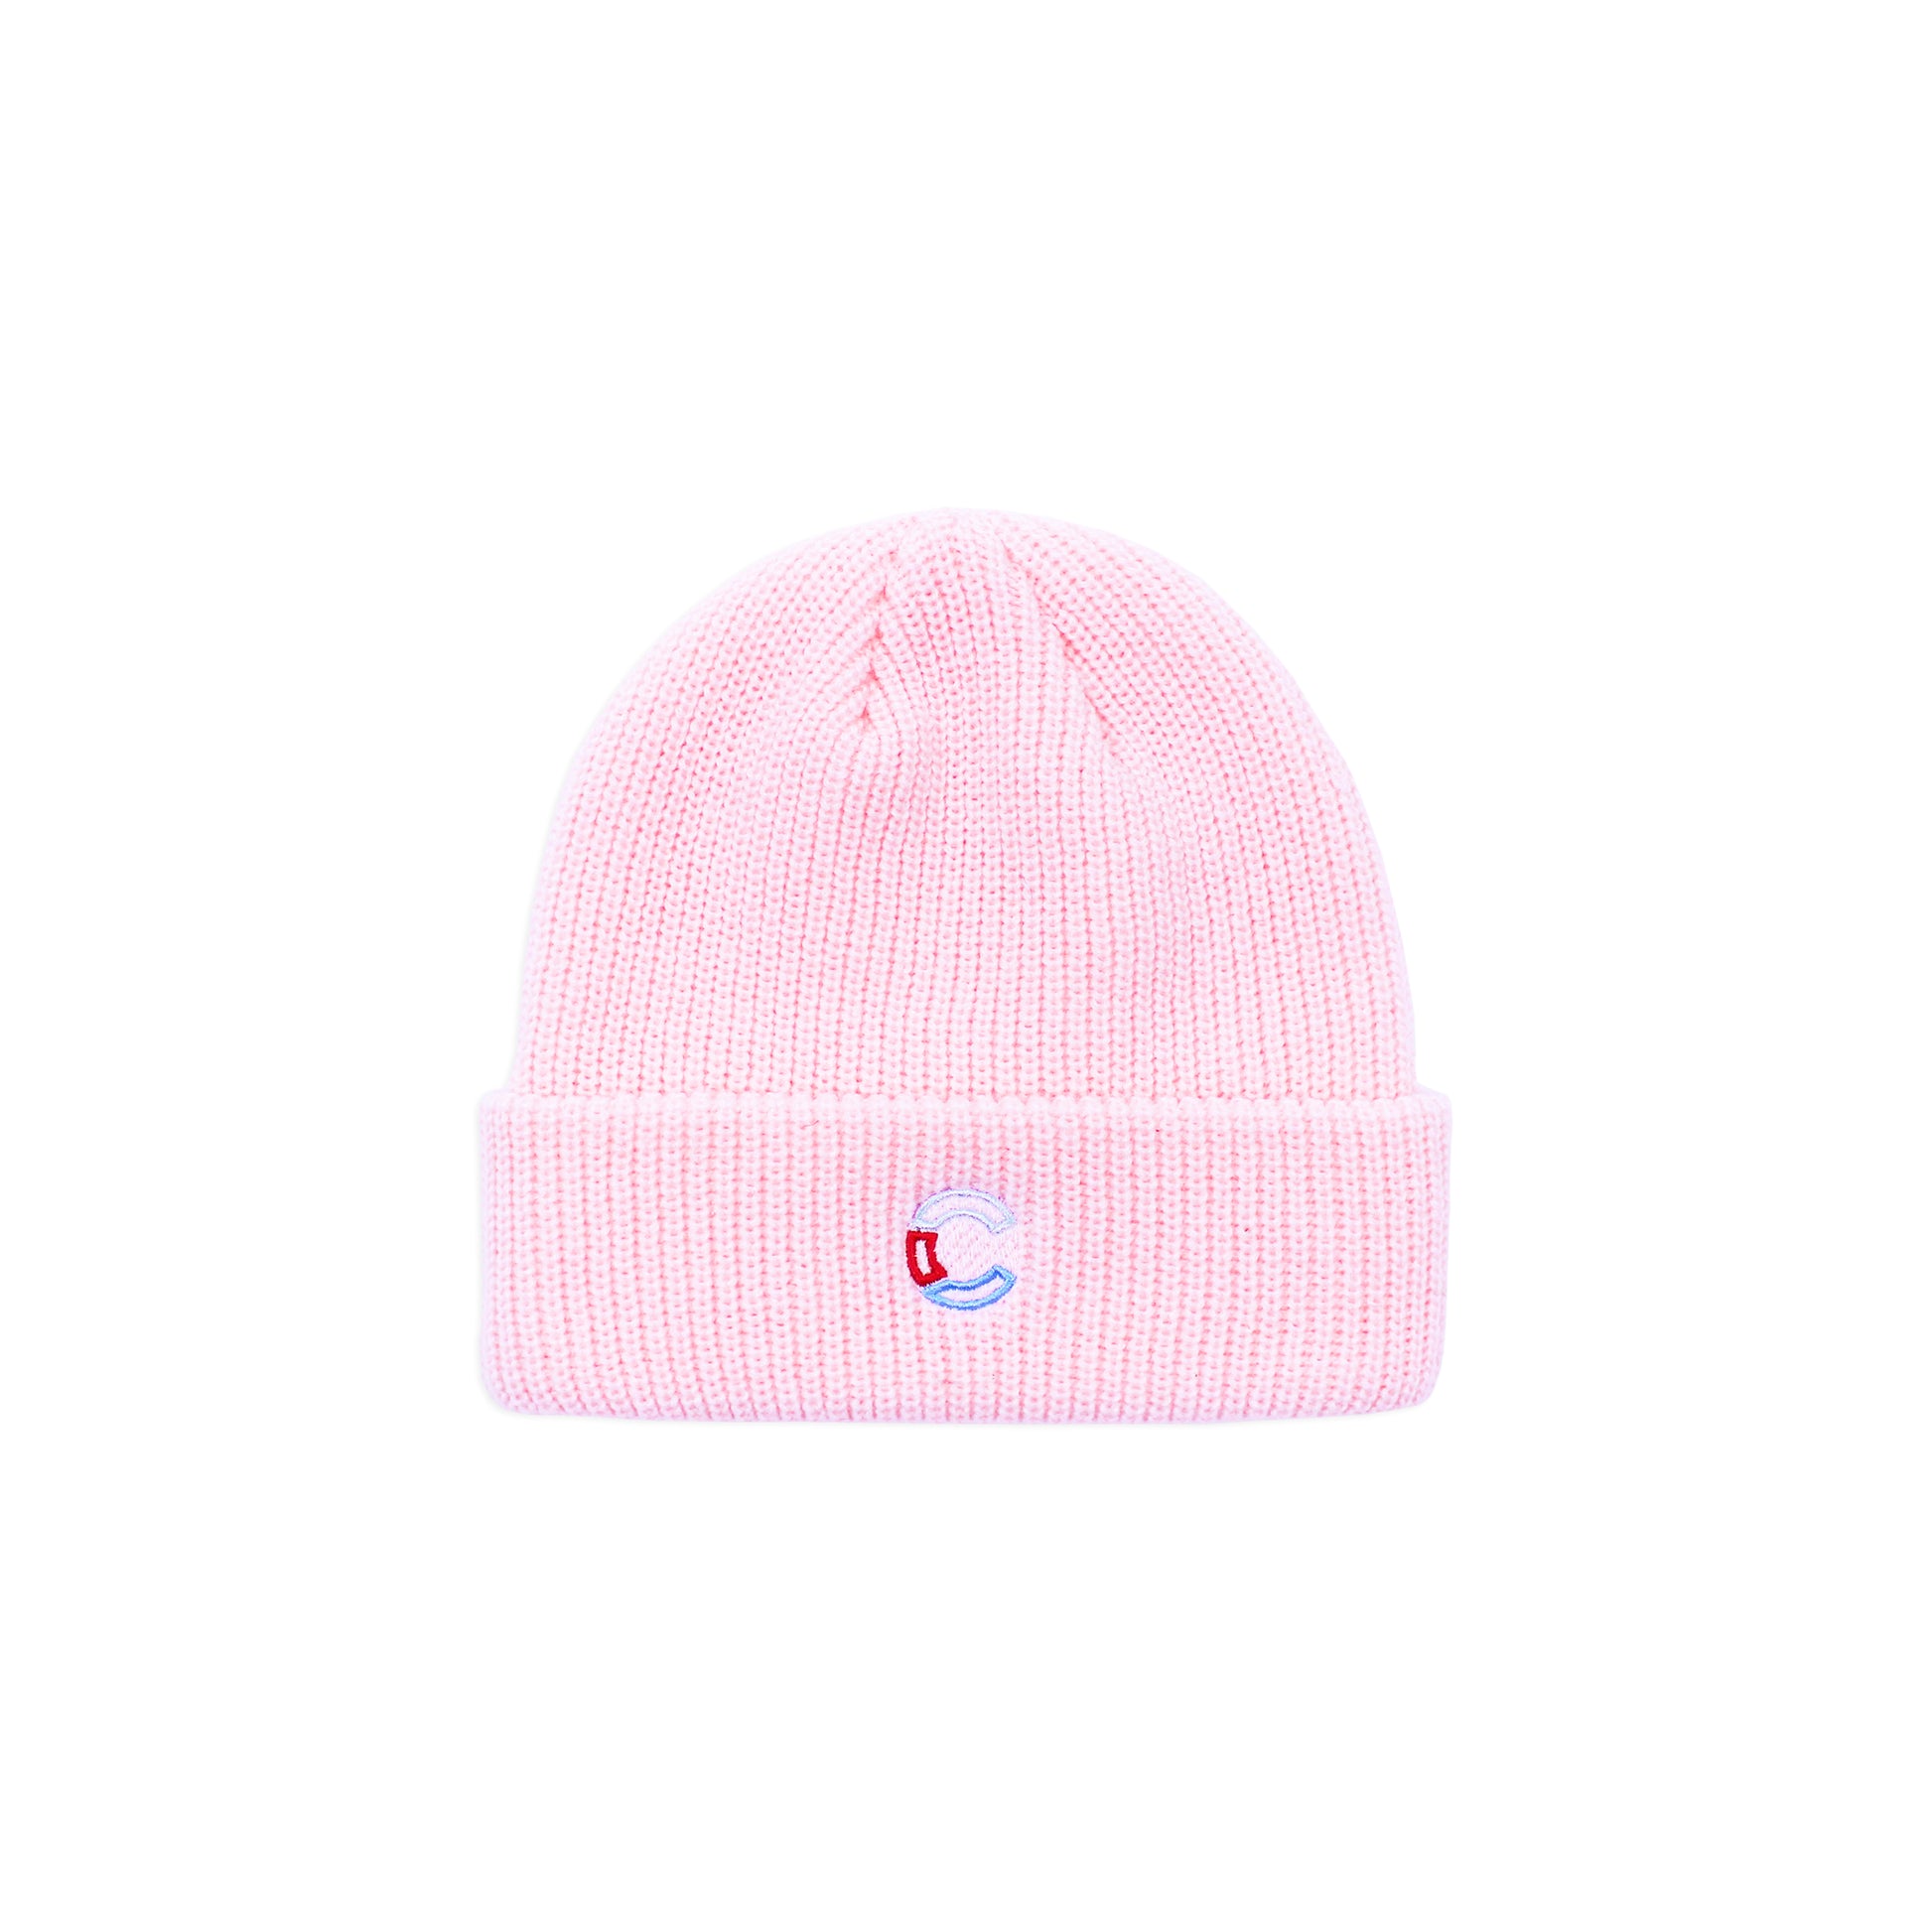 C Beanie Pink | Pink Beanie | the CRATE ny